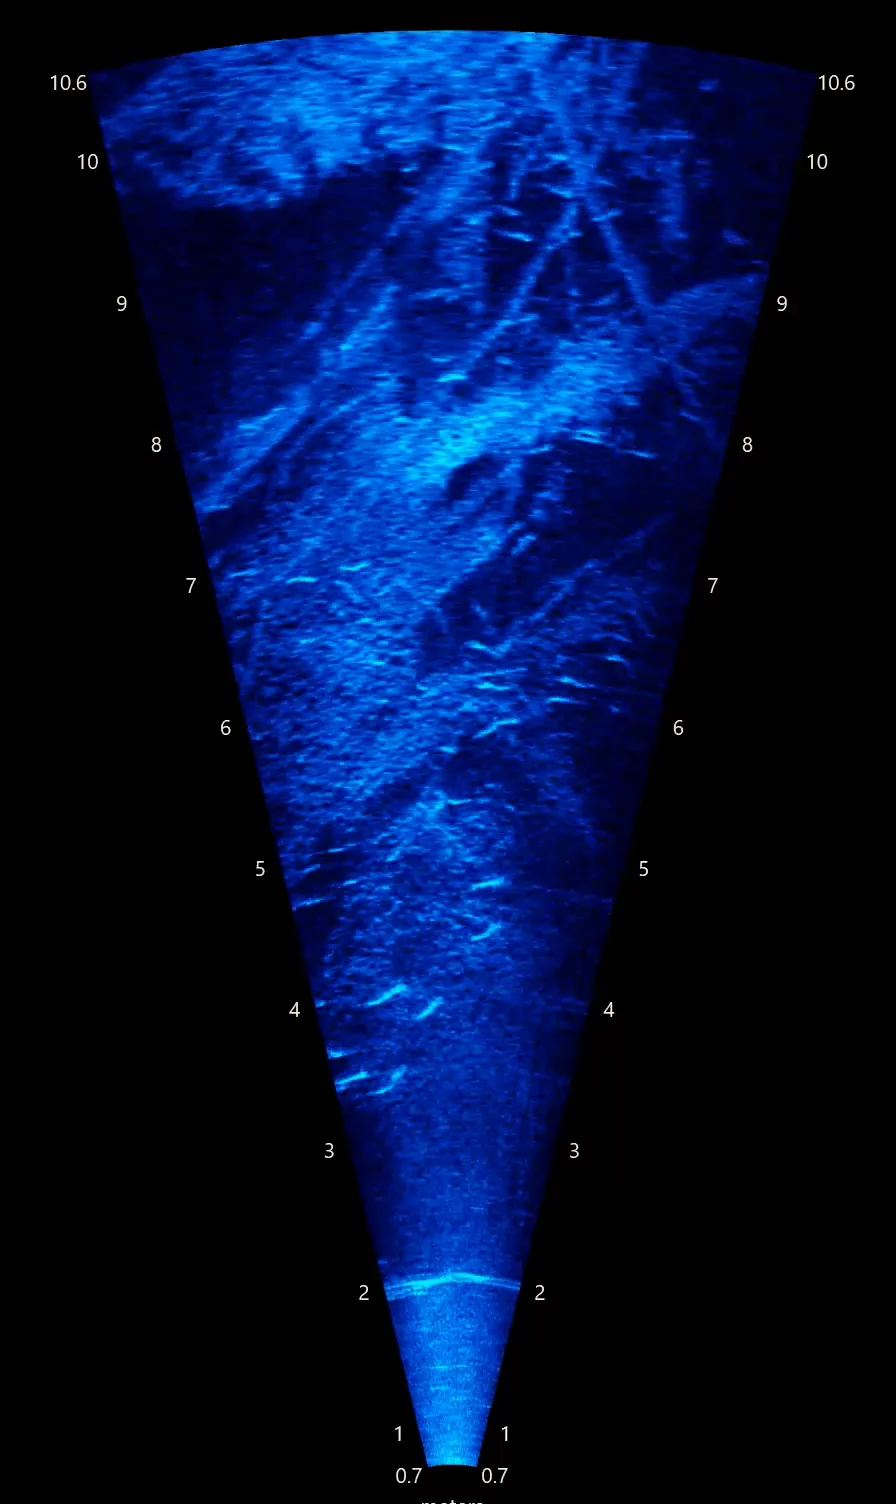 An image generated from a sonar sensor deployed in a river in Kakadu.